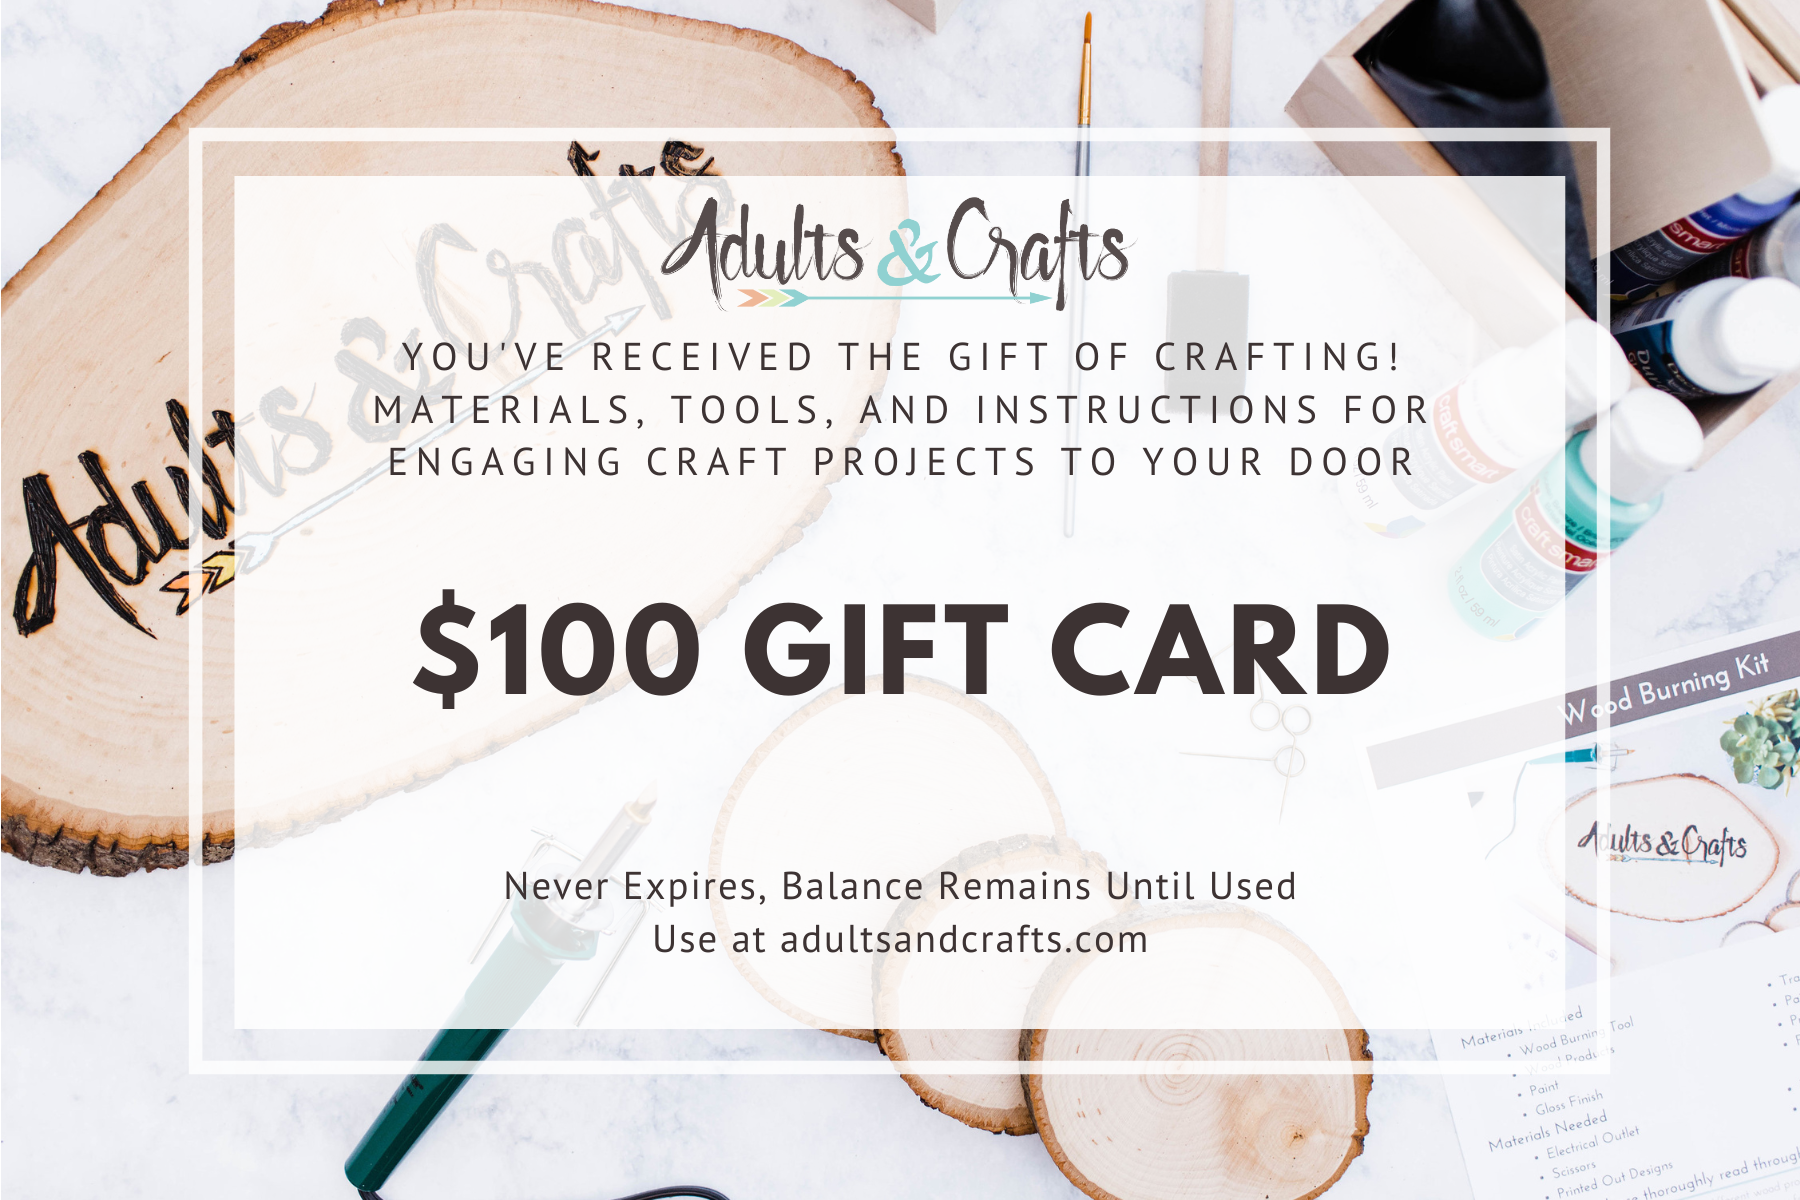 Adults & Crafts Gift Card